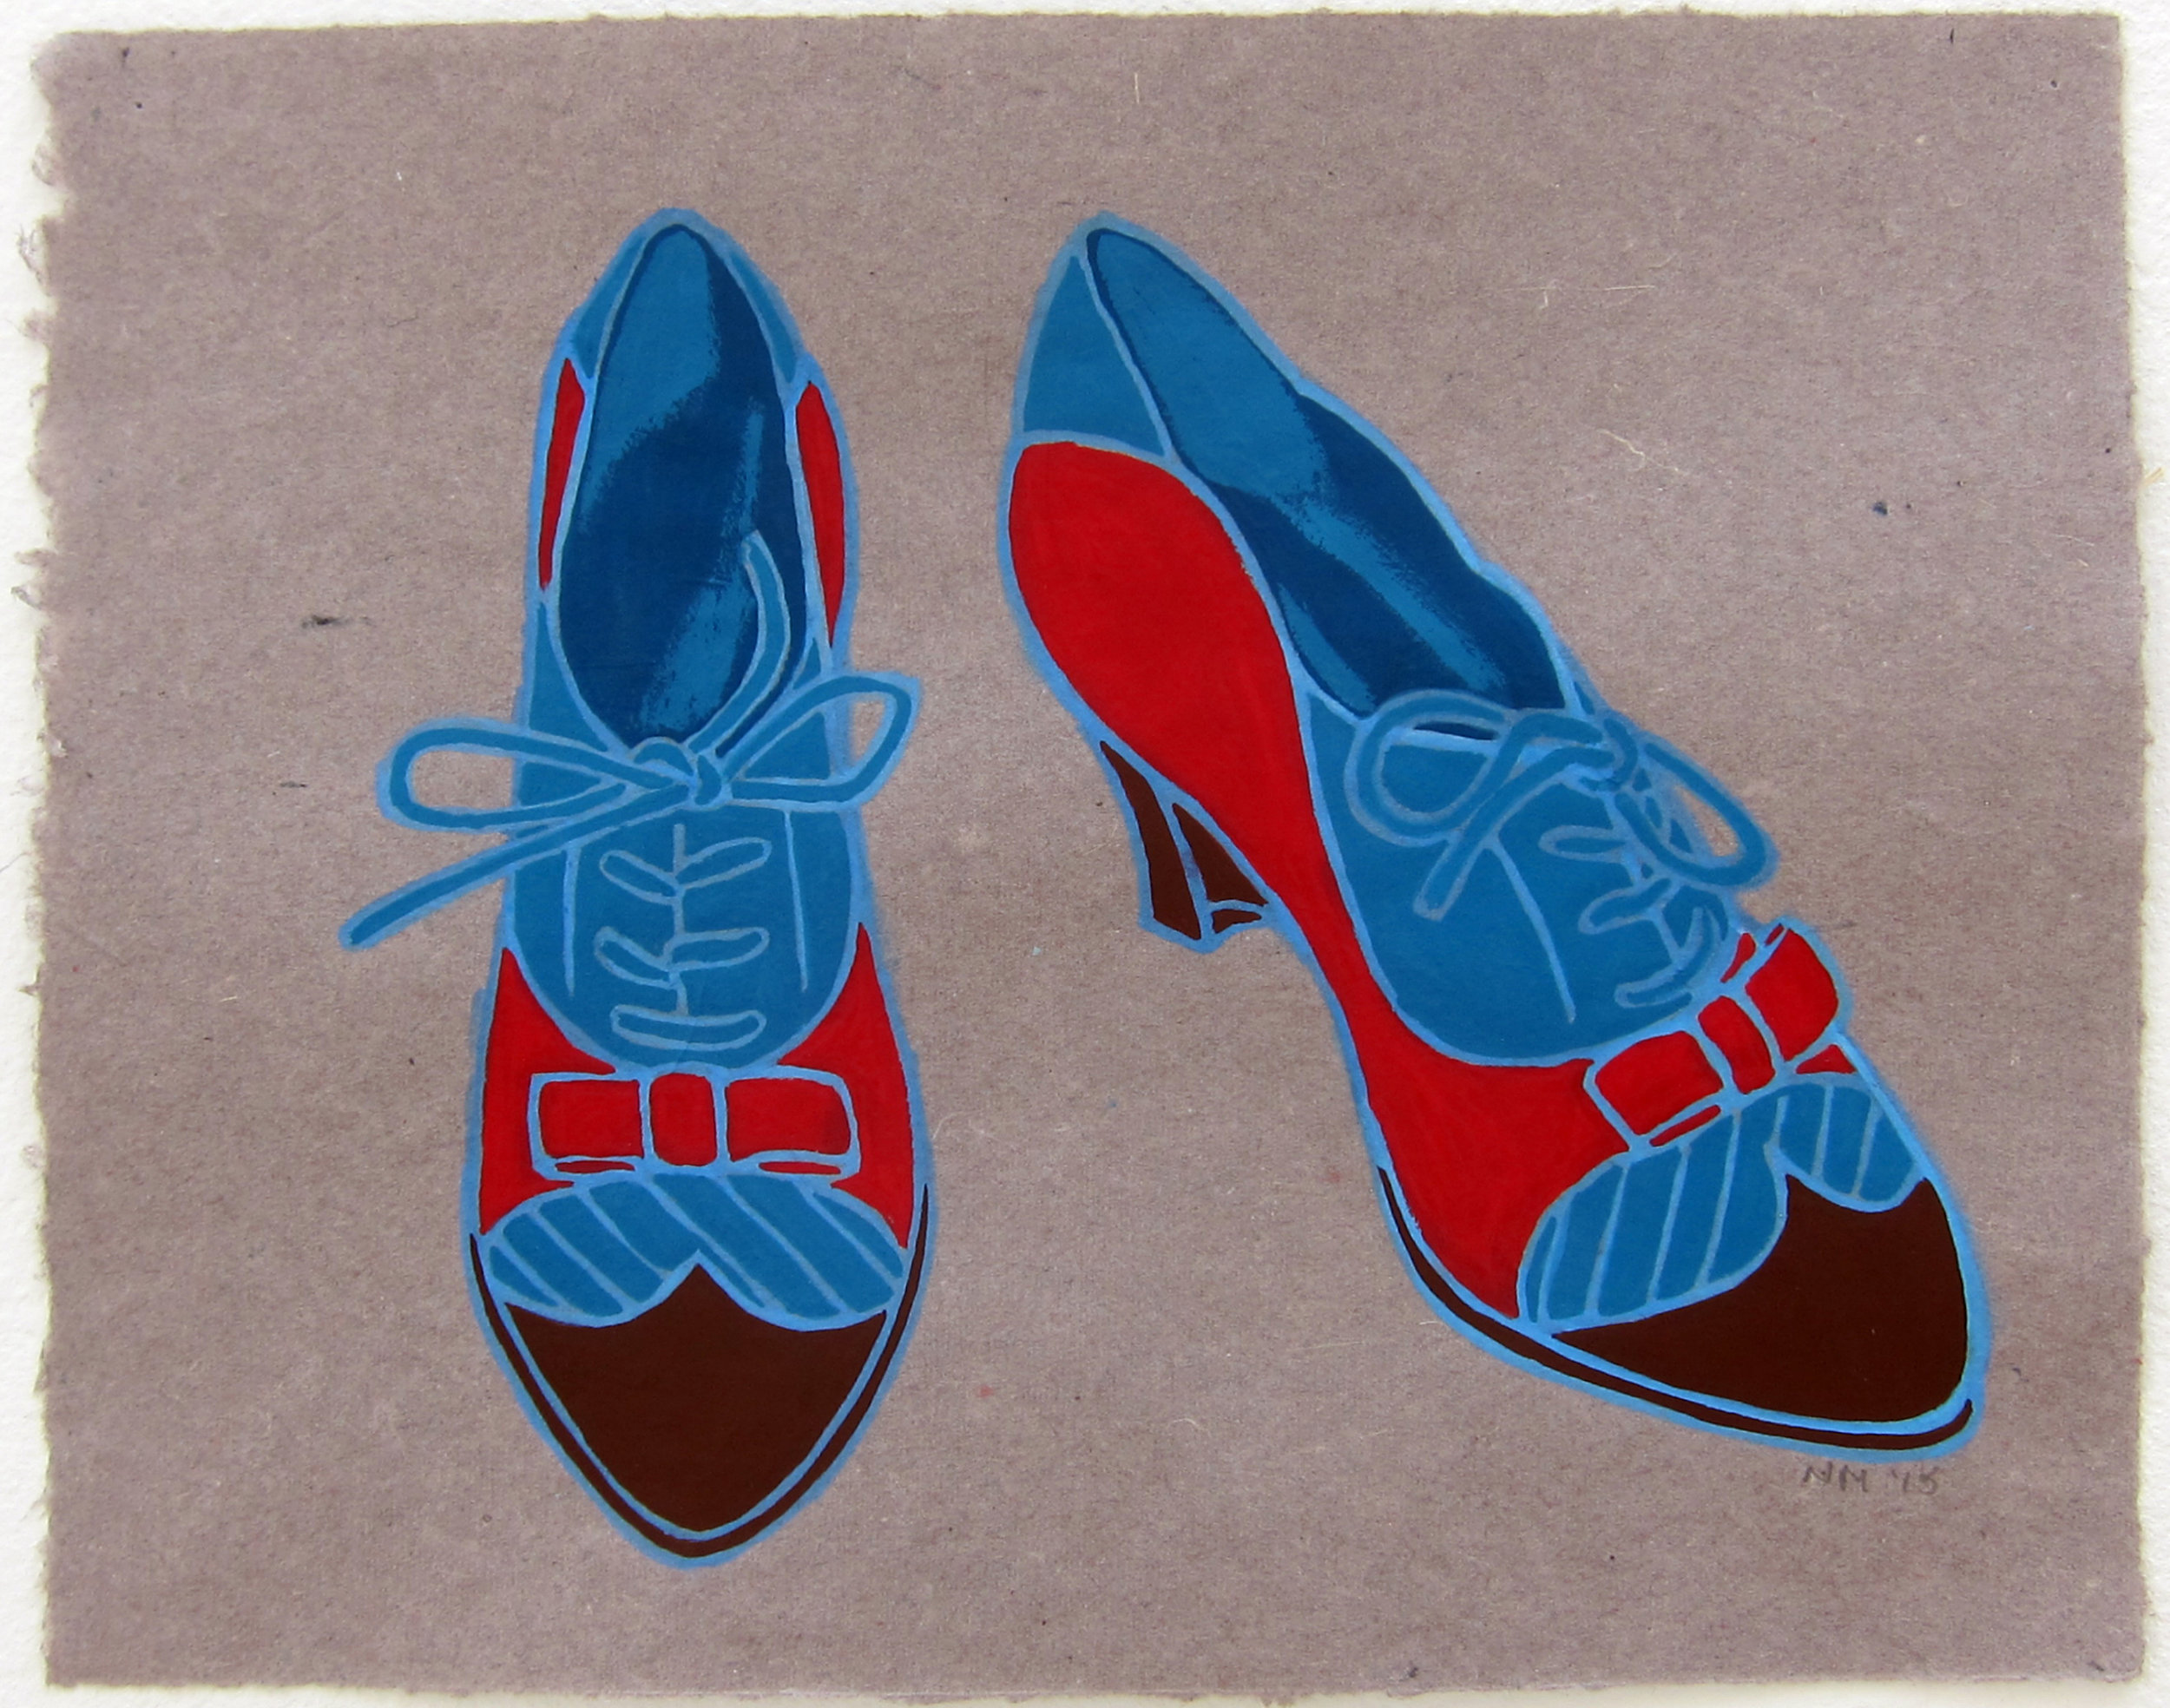   Favorite Shoes   9.5"x12" flashe on paper  2015 